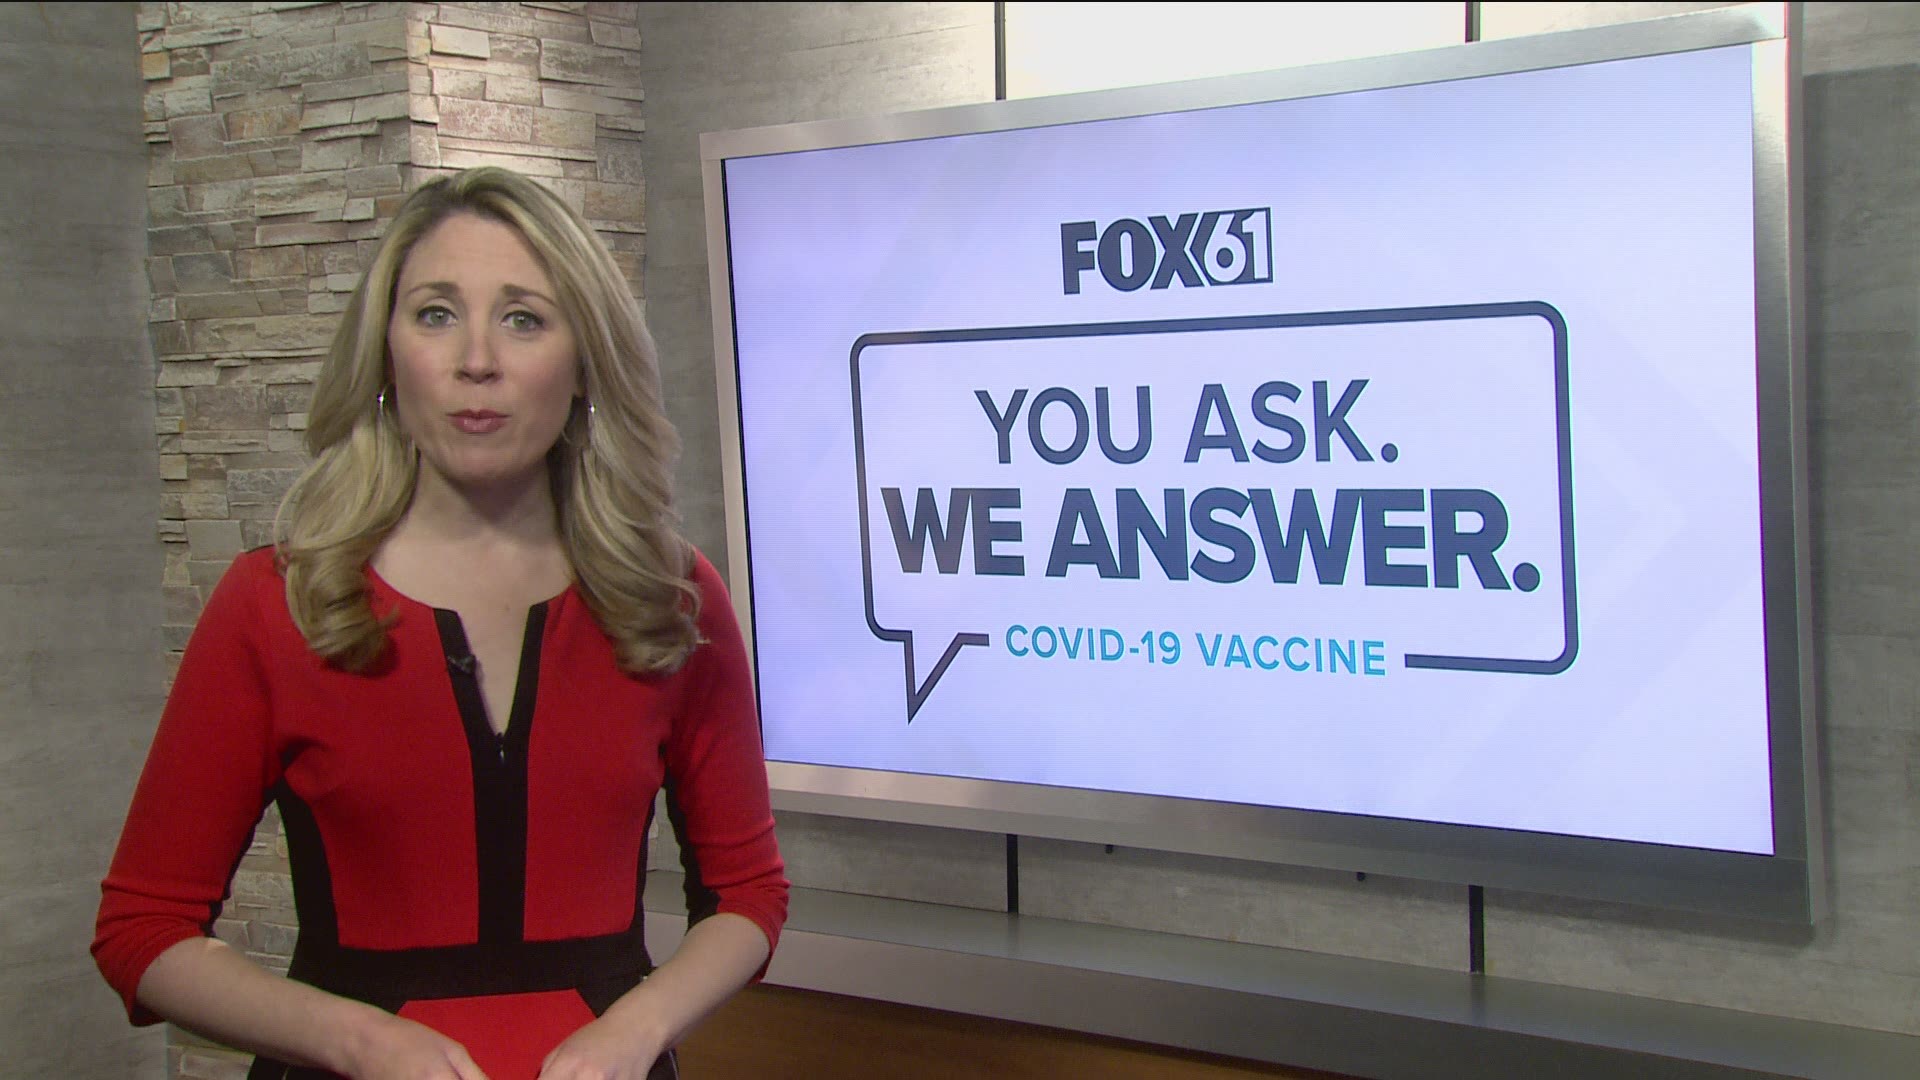 “I recently had my second Shingrix vaccine. How long should I wait for my COVID-19 vaccine?